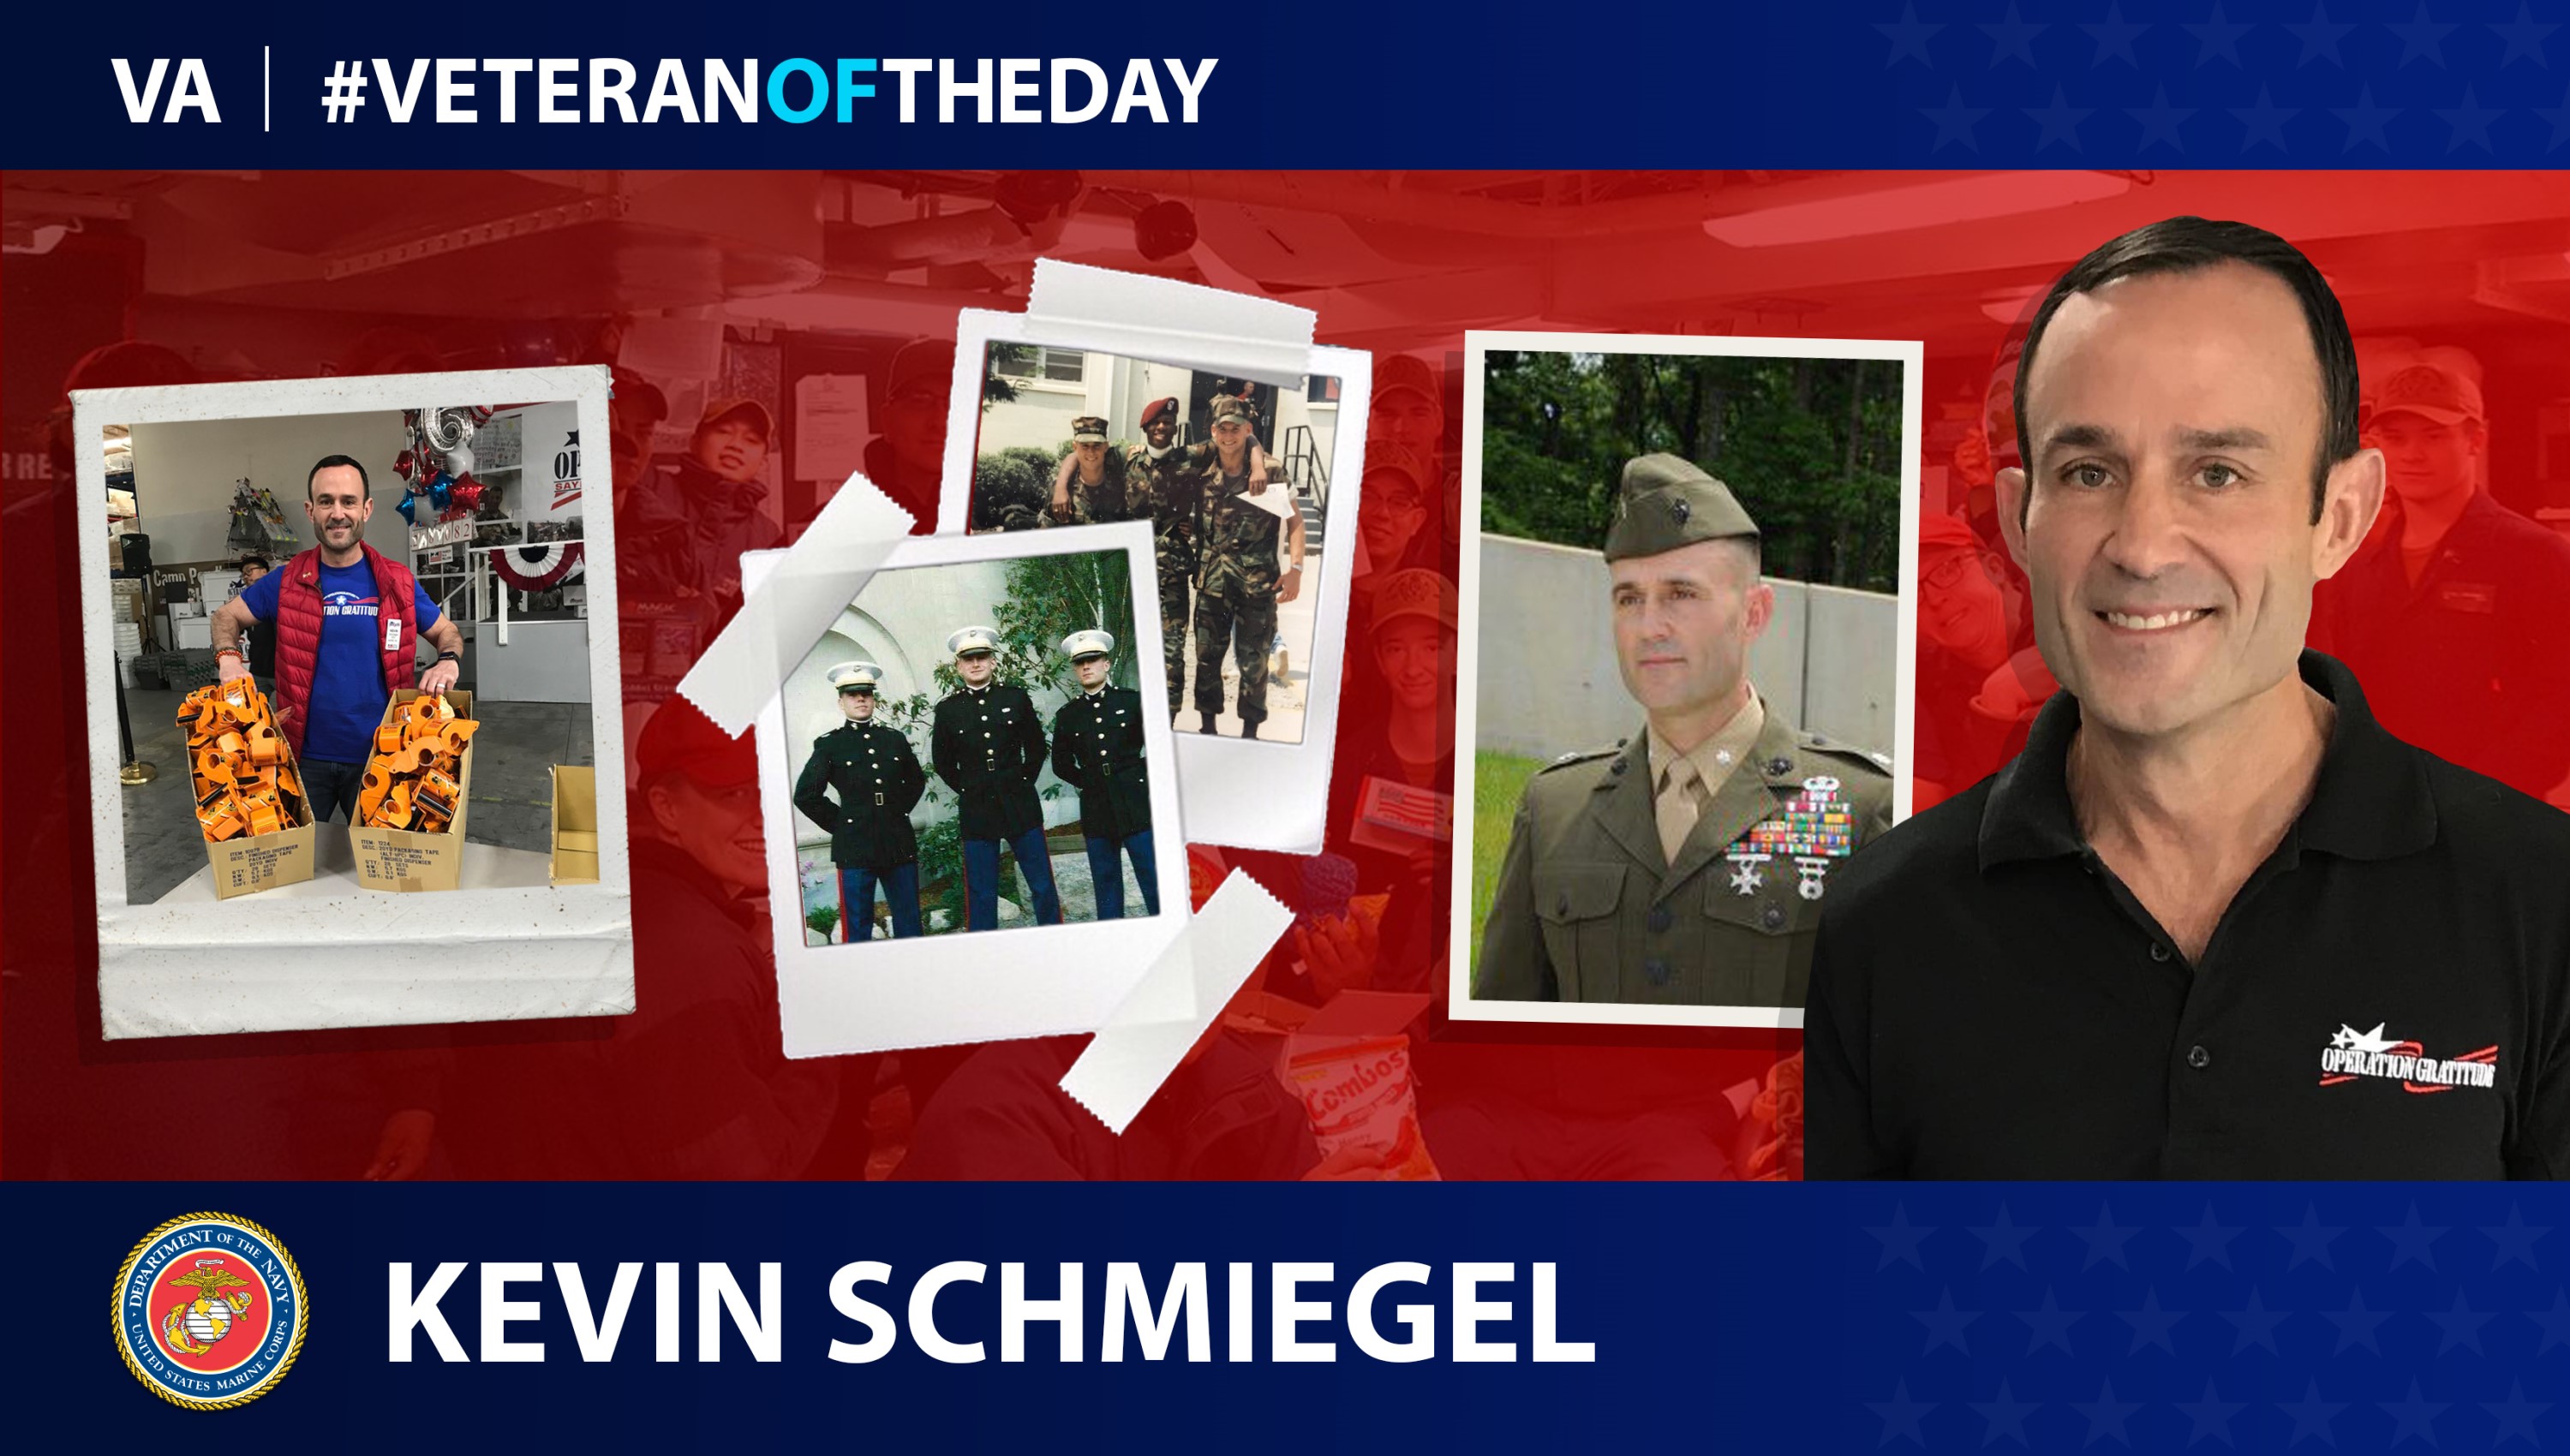 Marine Corps Veteran Kevin Schmiegel is today’s Veteran of the Day.